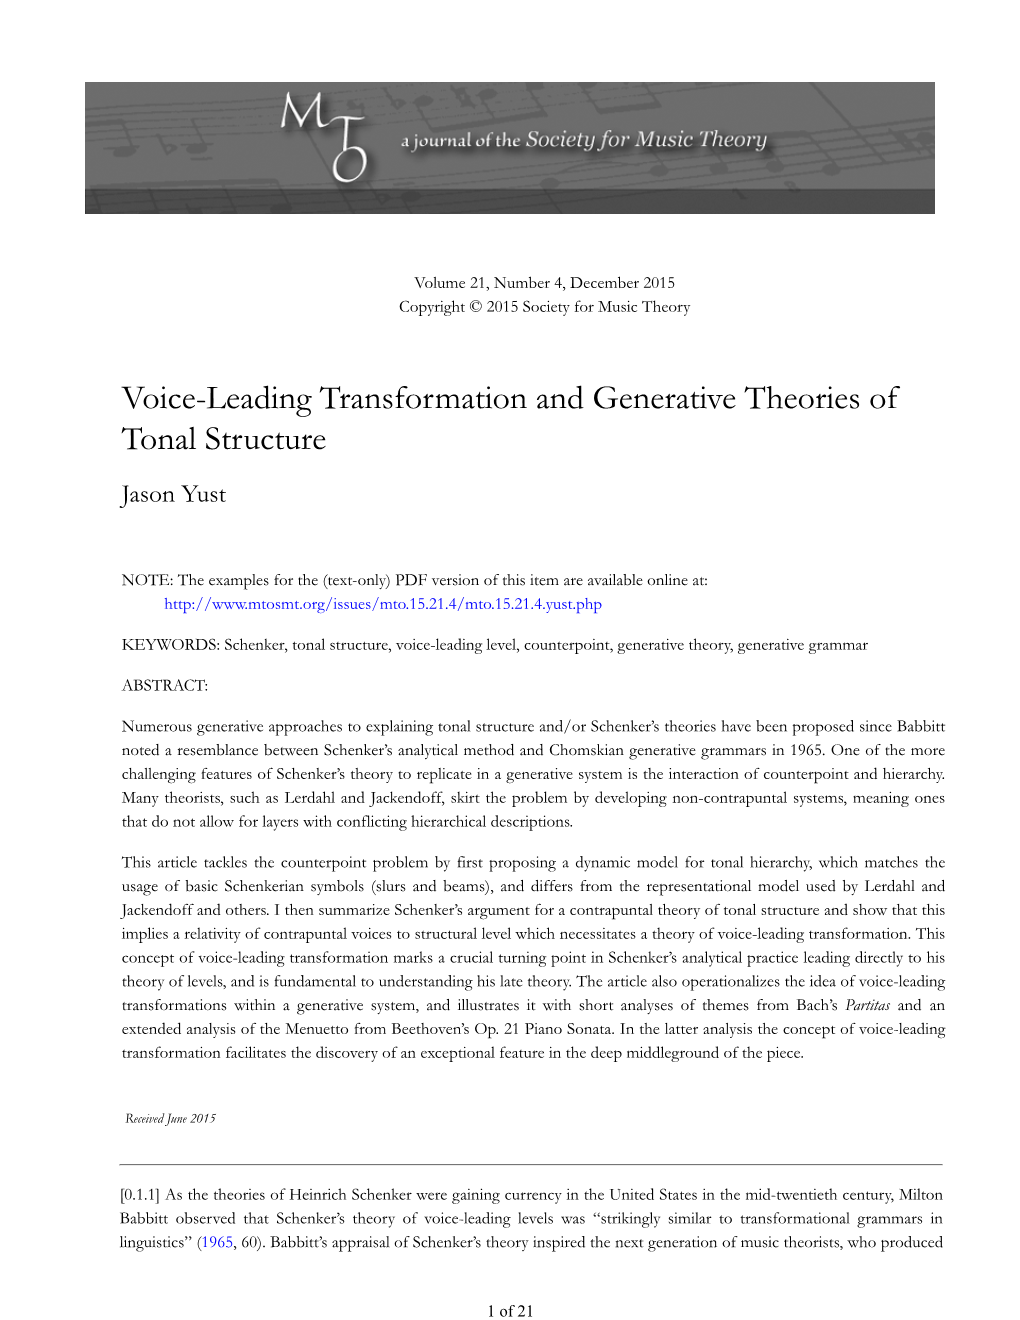 MTO 21.4: Yust, Voice-Leading Transformation and Generative